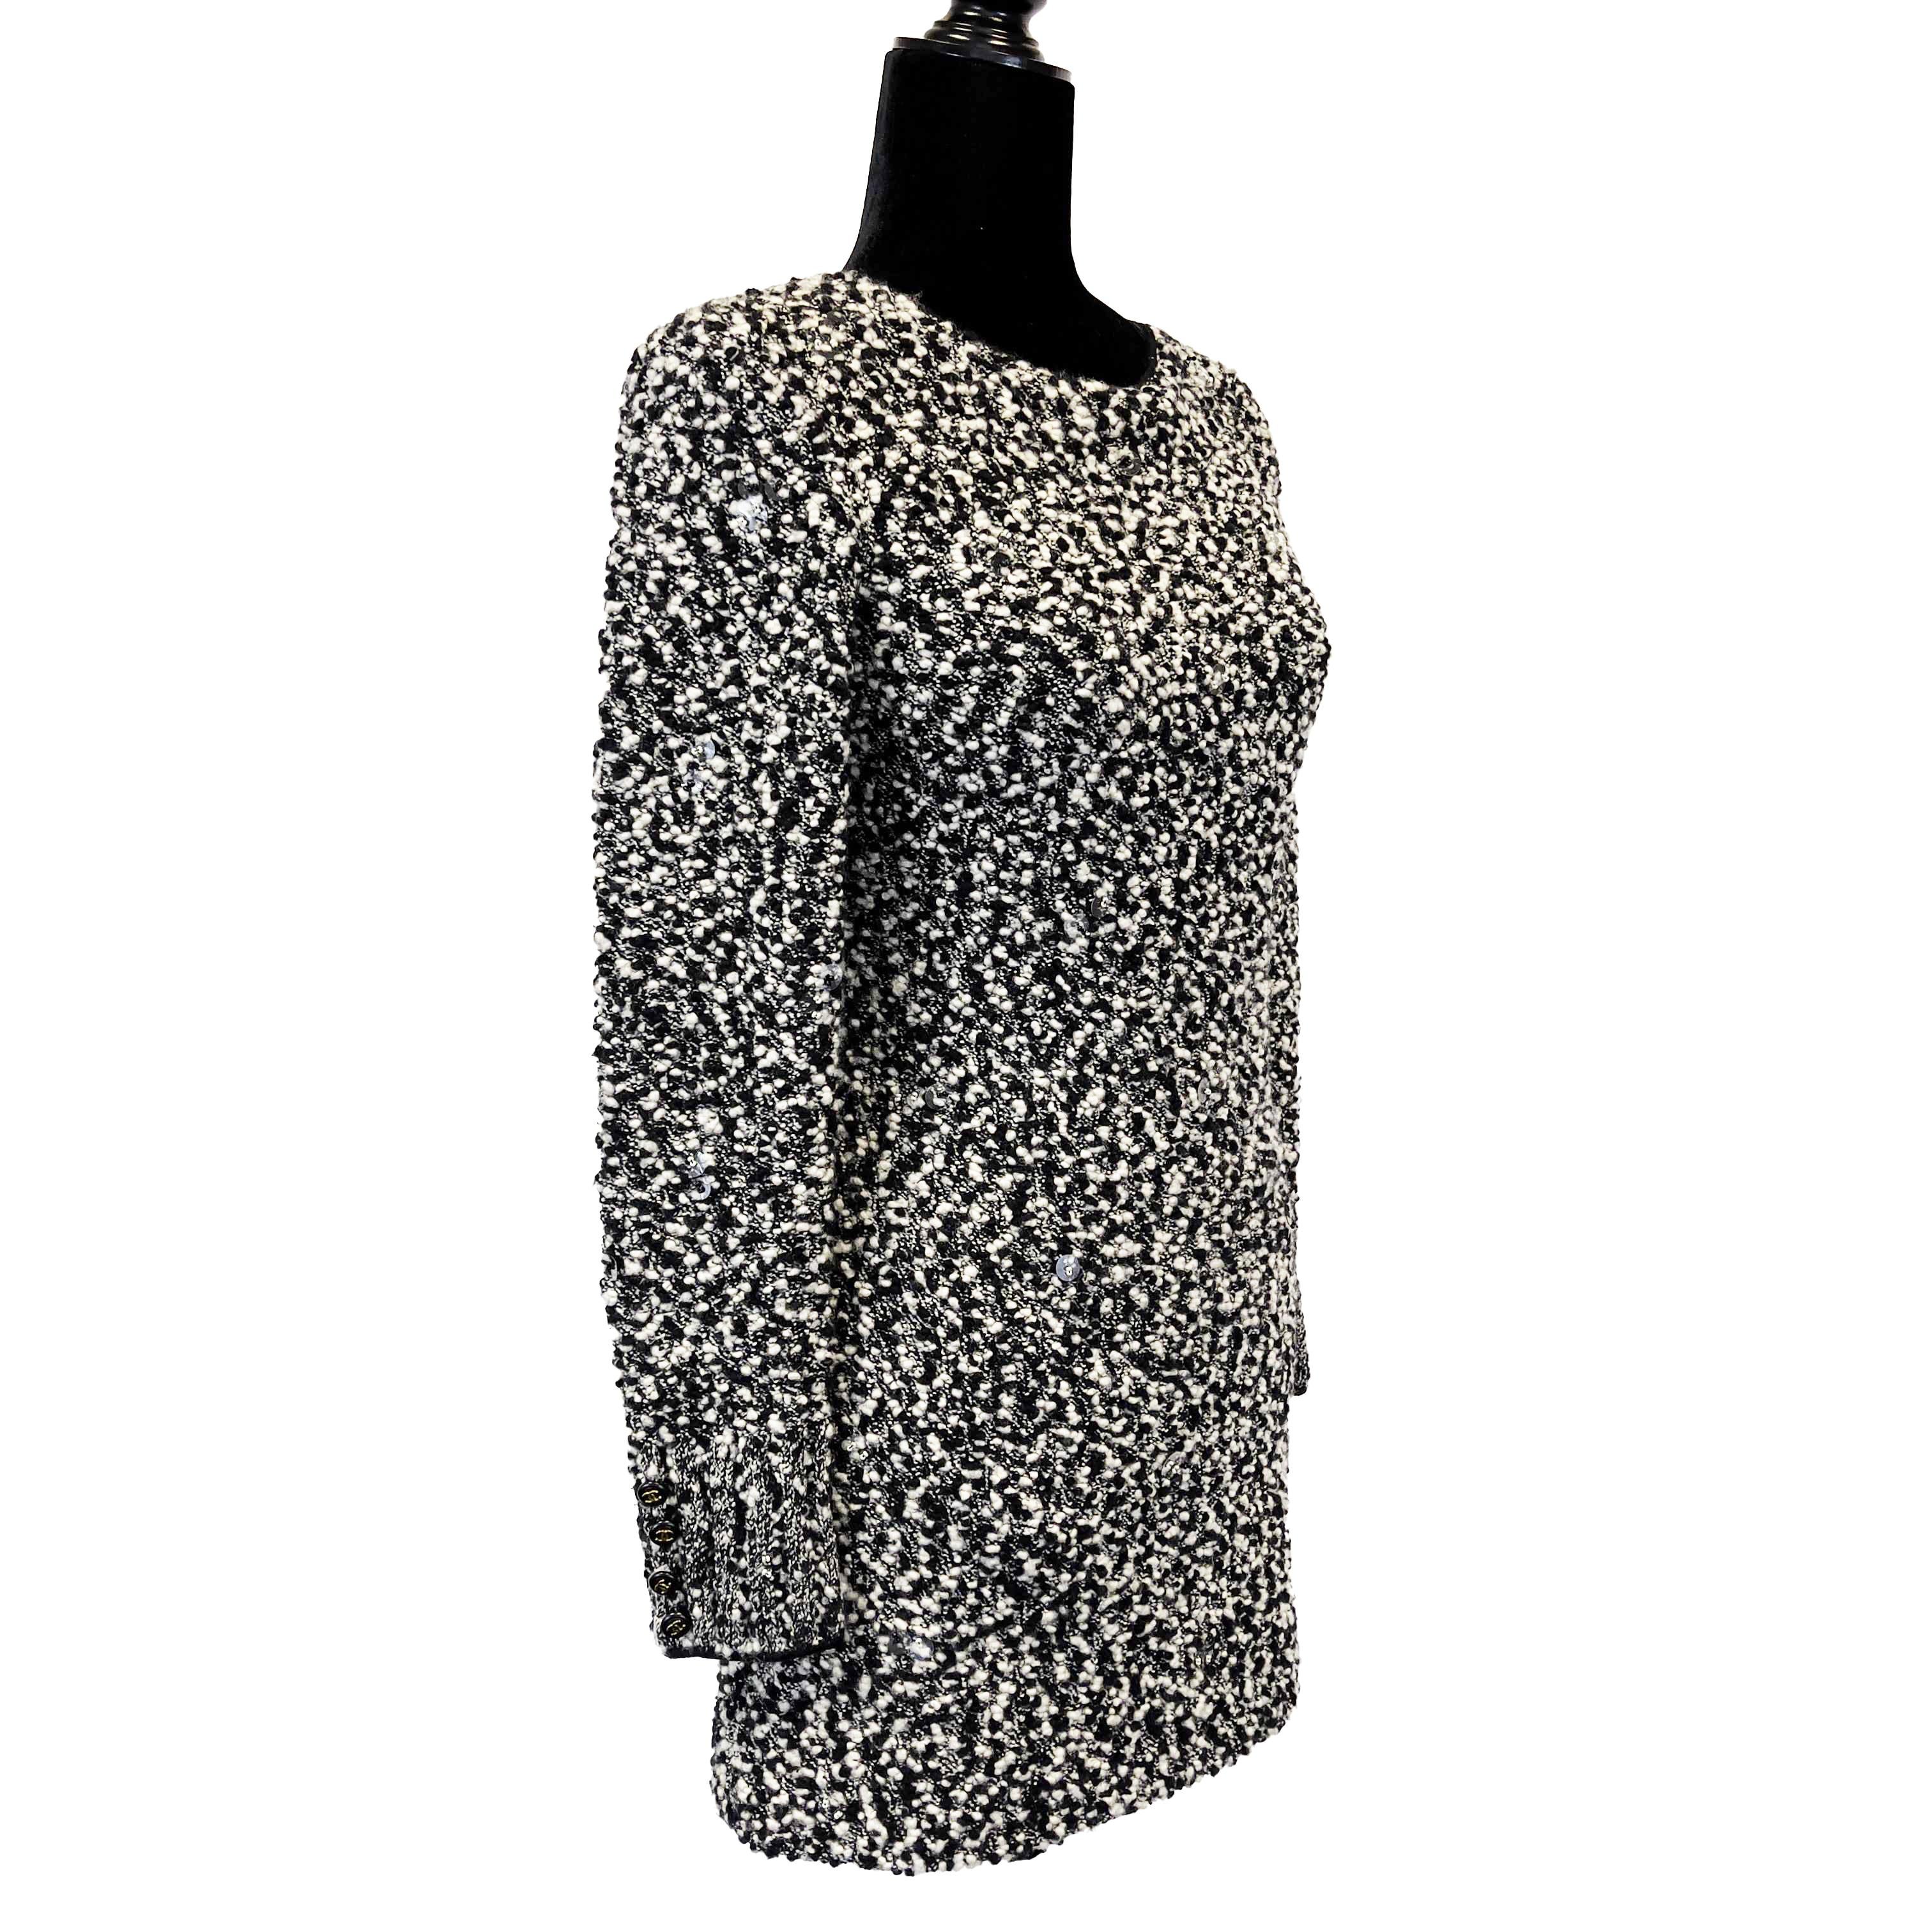 CHANEL - 94A Knit Clear Sequin Dress - Black & White - 38 US 6 For Sale 4